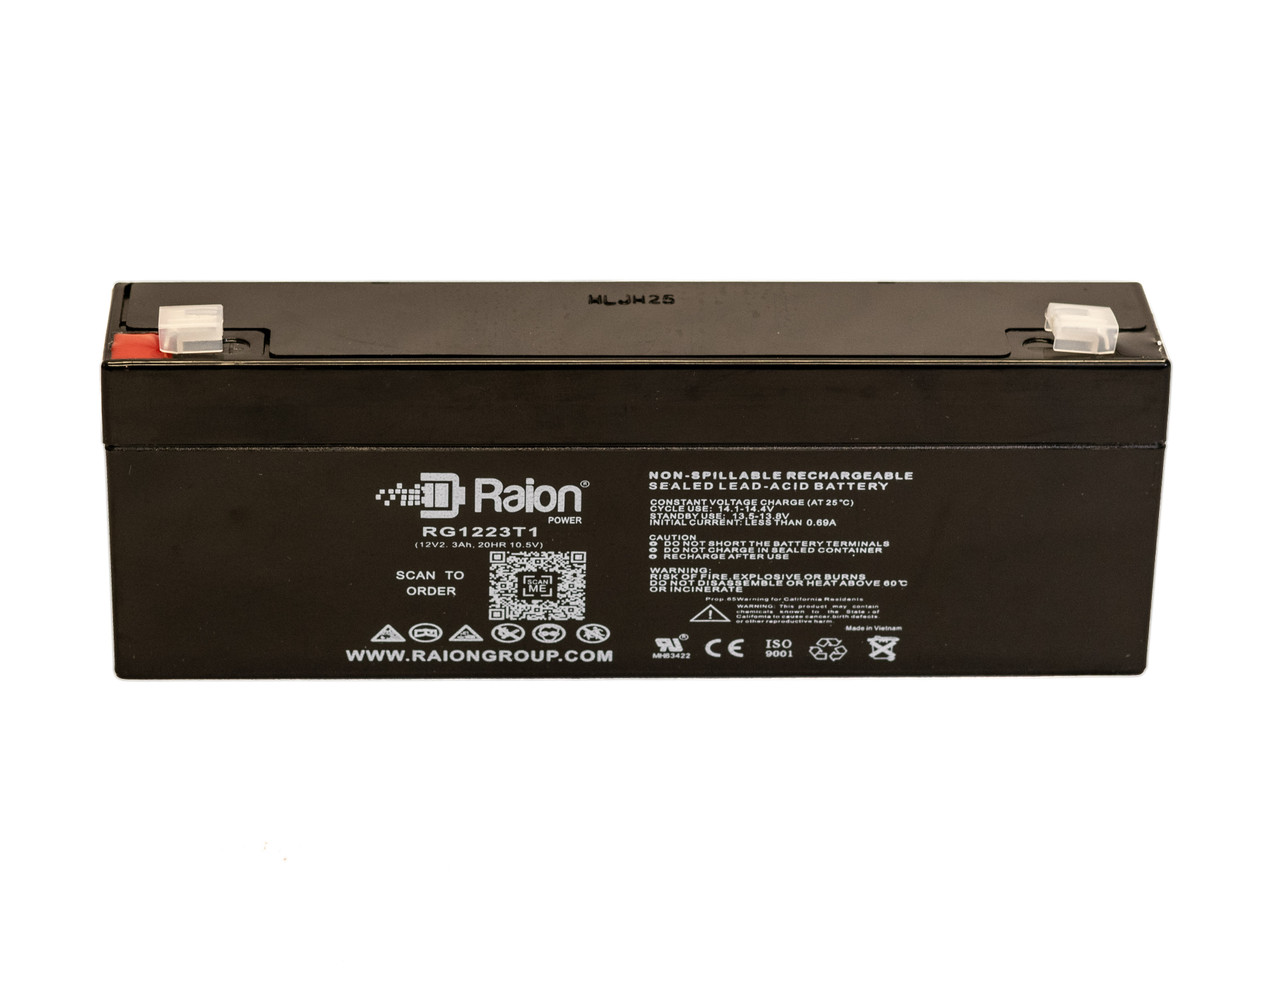 Raion Power 12V 2.3Ah SLA Battery With T1 Terminals For B. Braun Outlook 200 Safety Infusion System